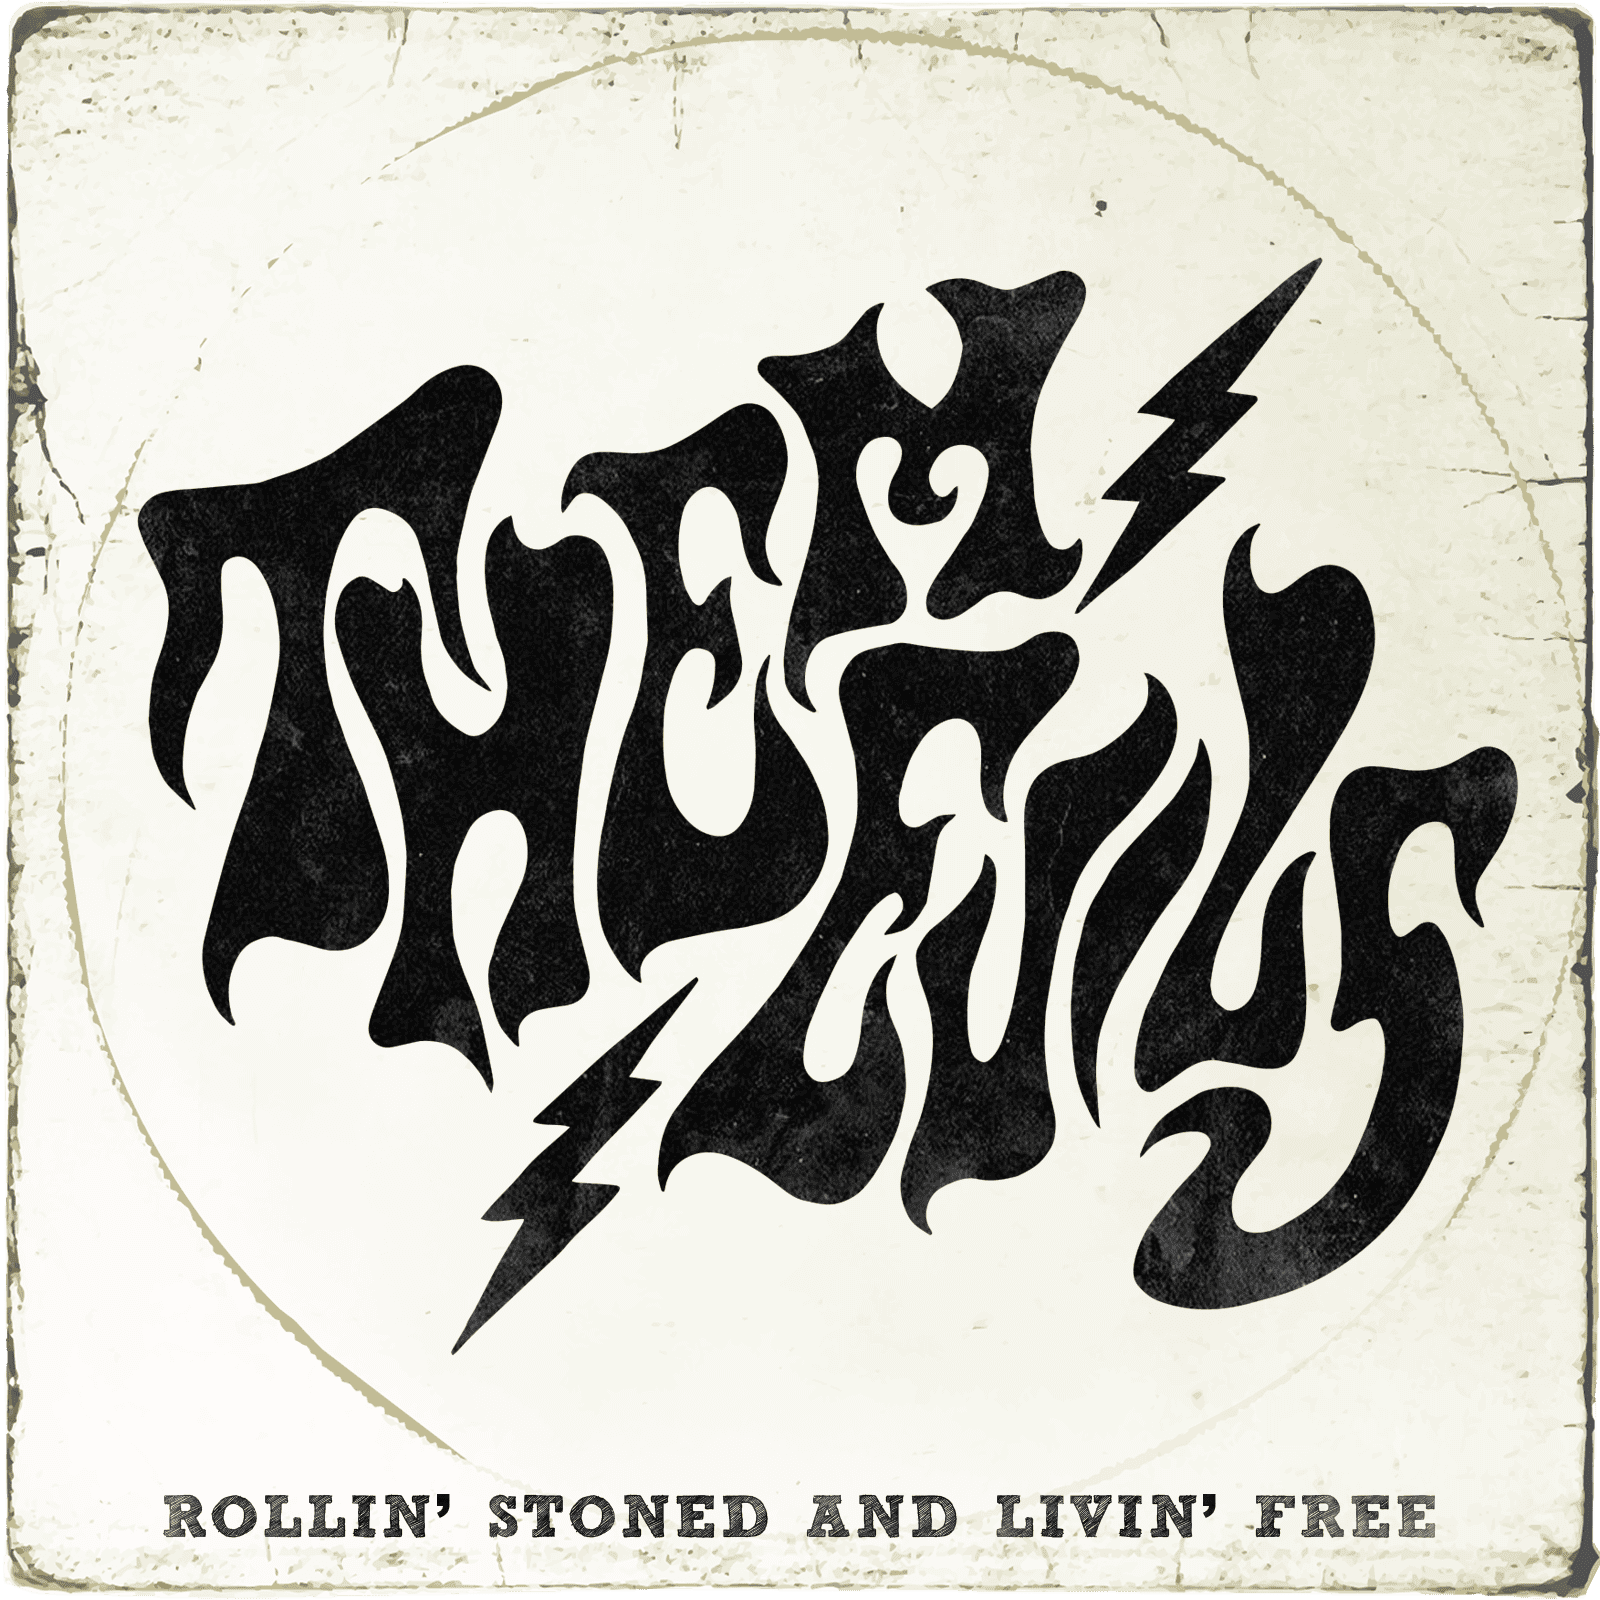 Them Evils - "Rollin' Stone and Livin' Free" EP